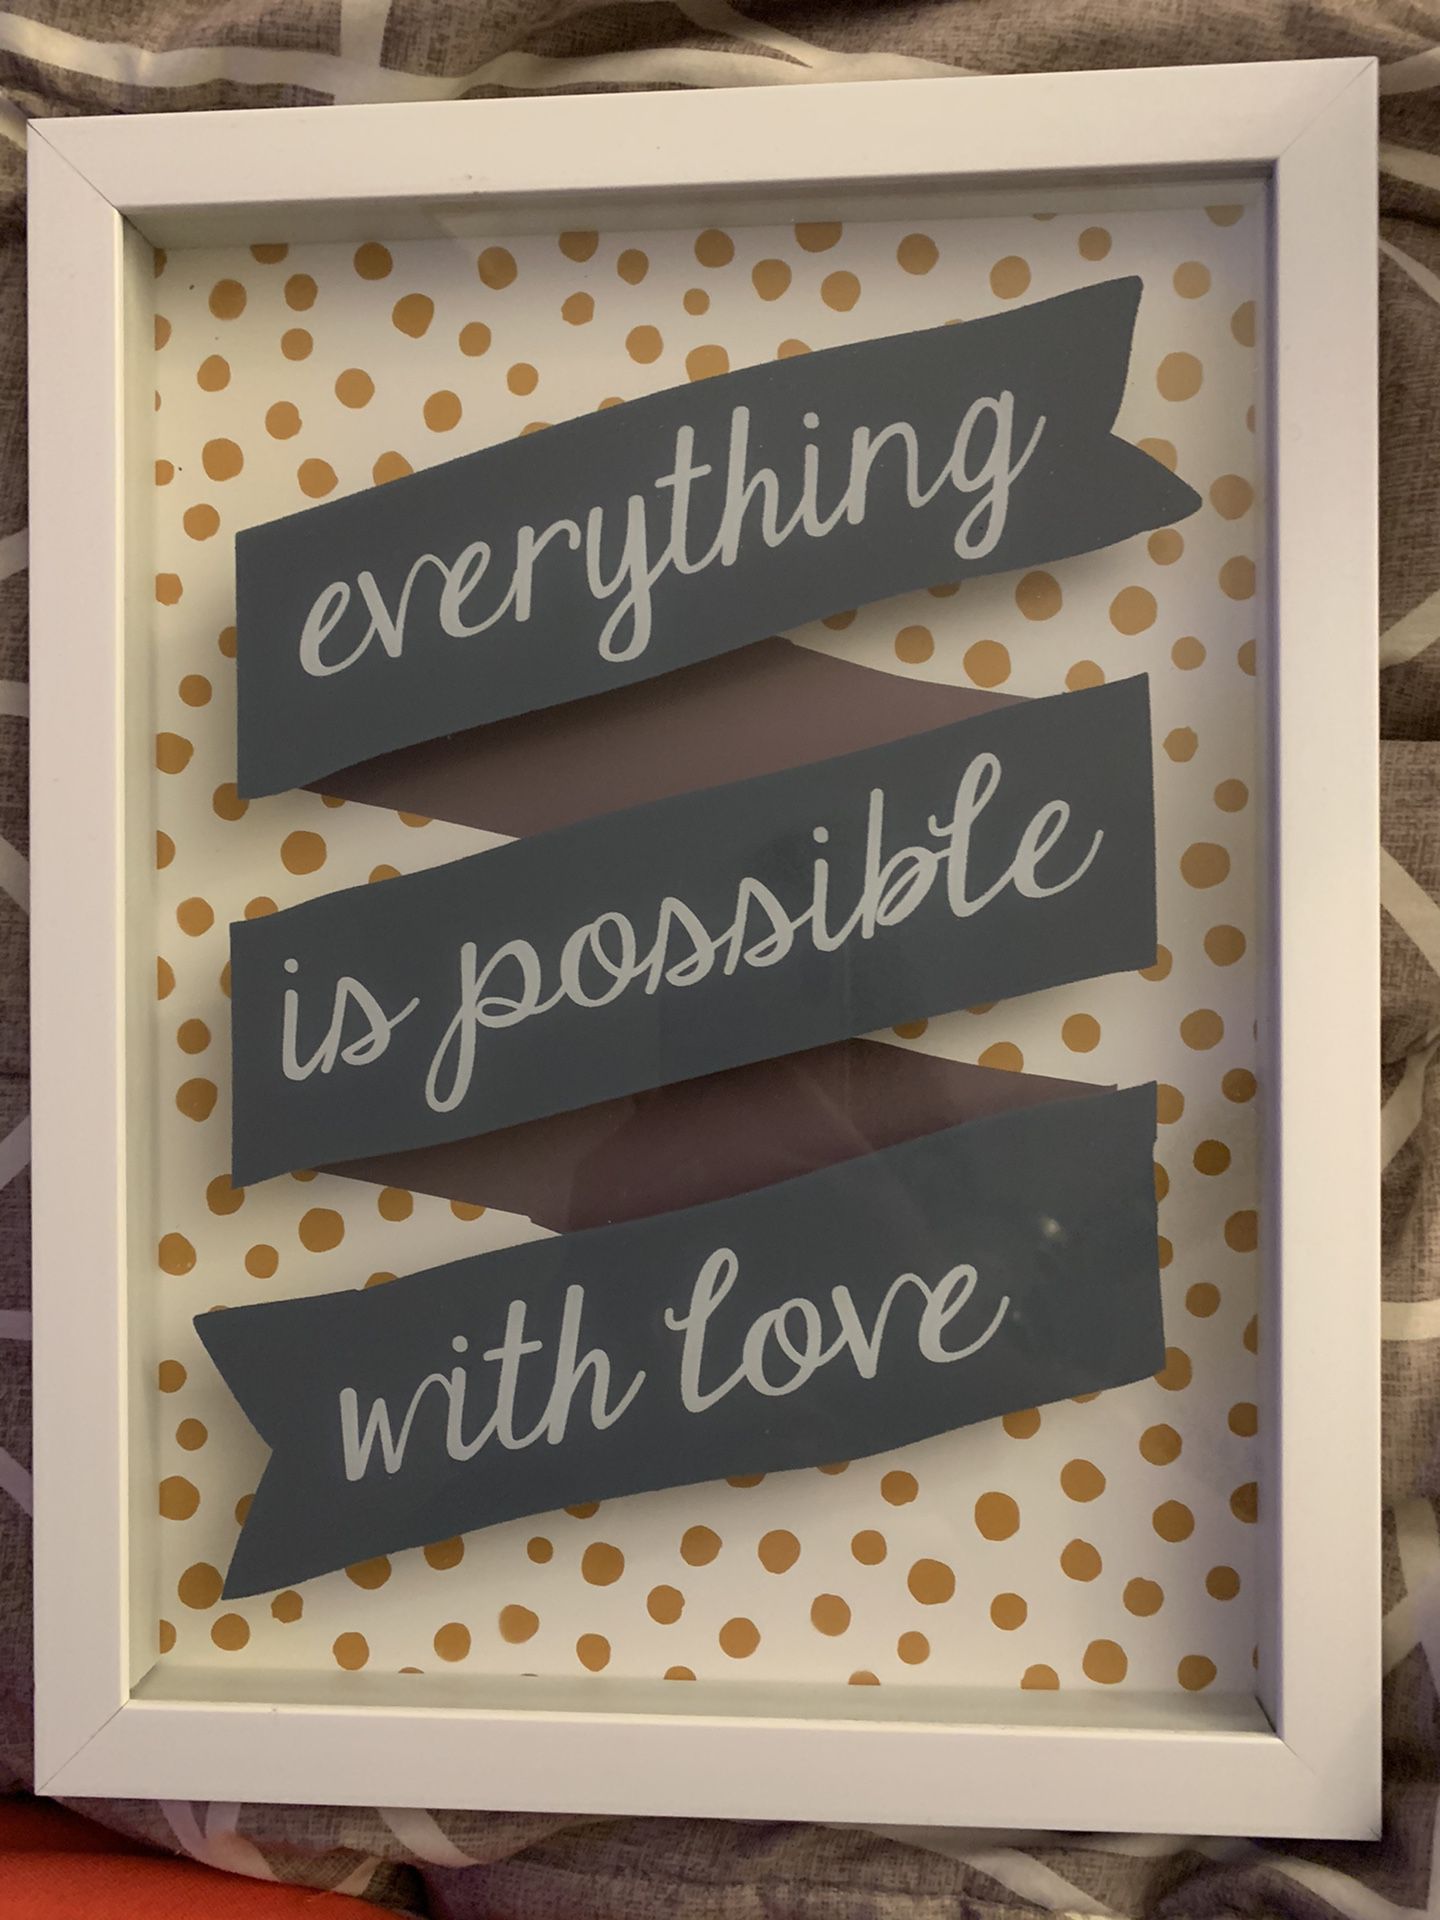 Decorative Hanging Picture w/ Quote